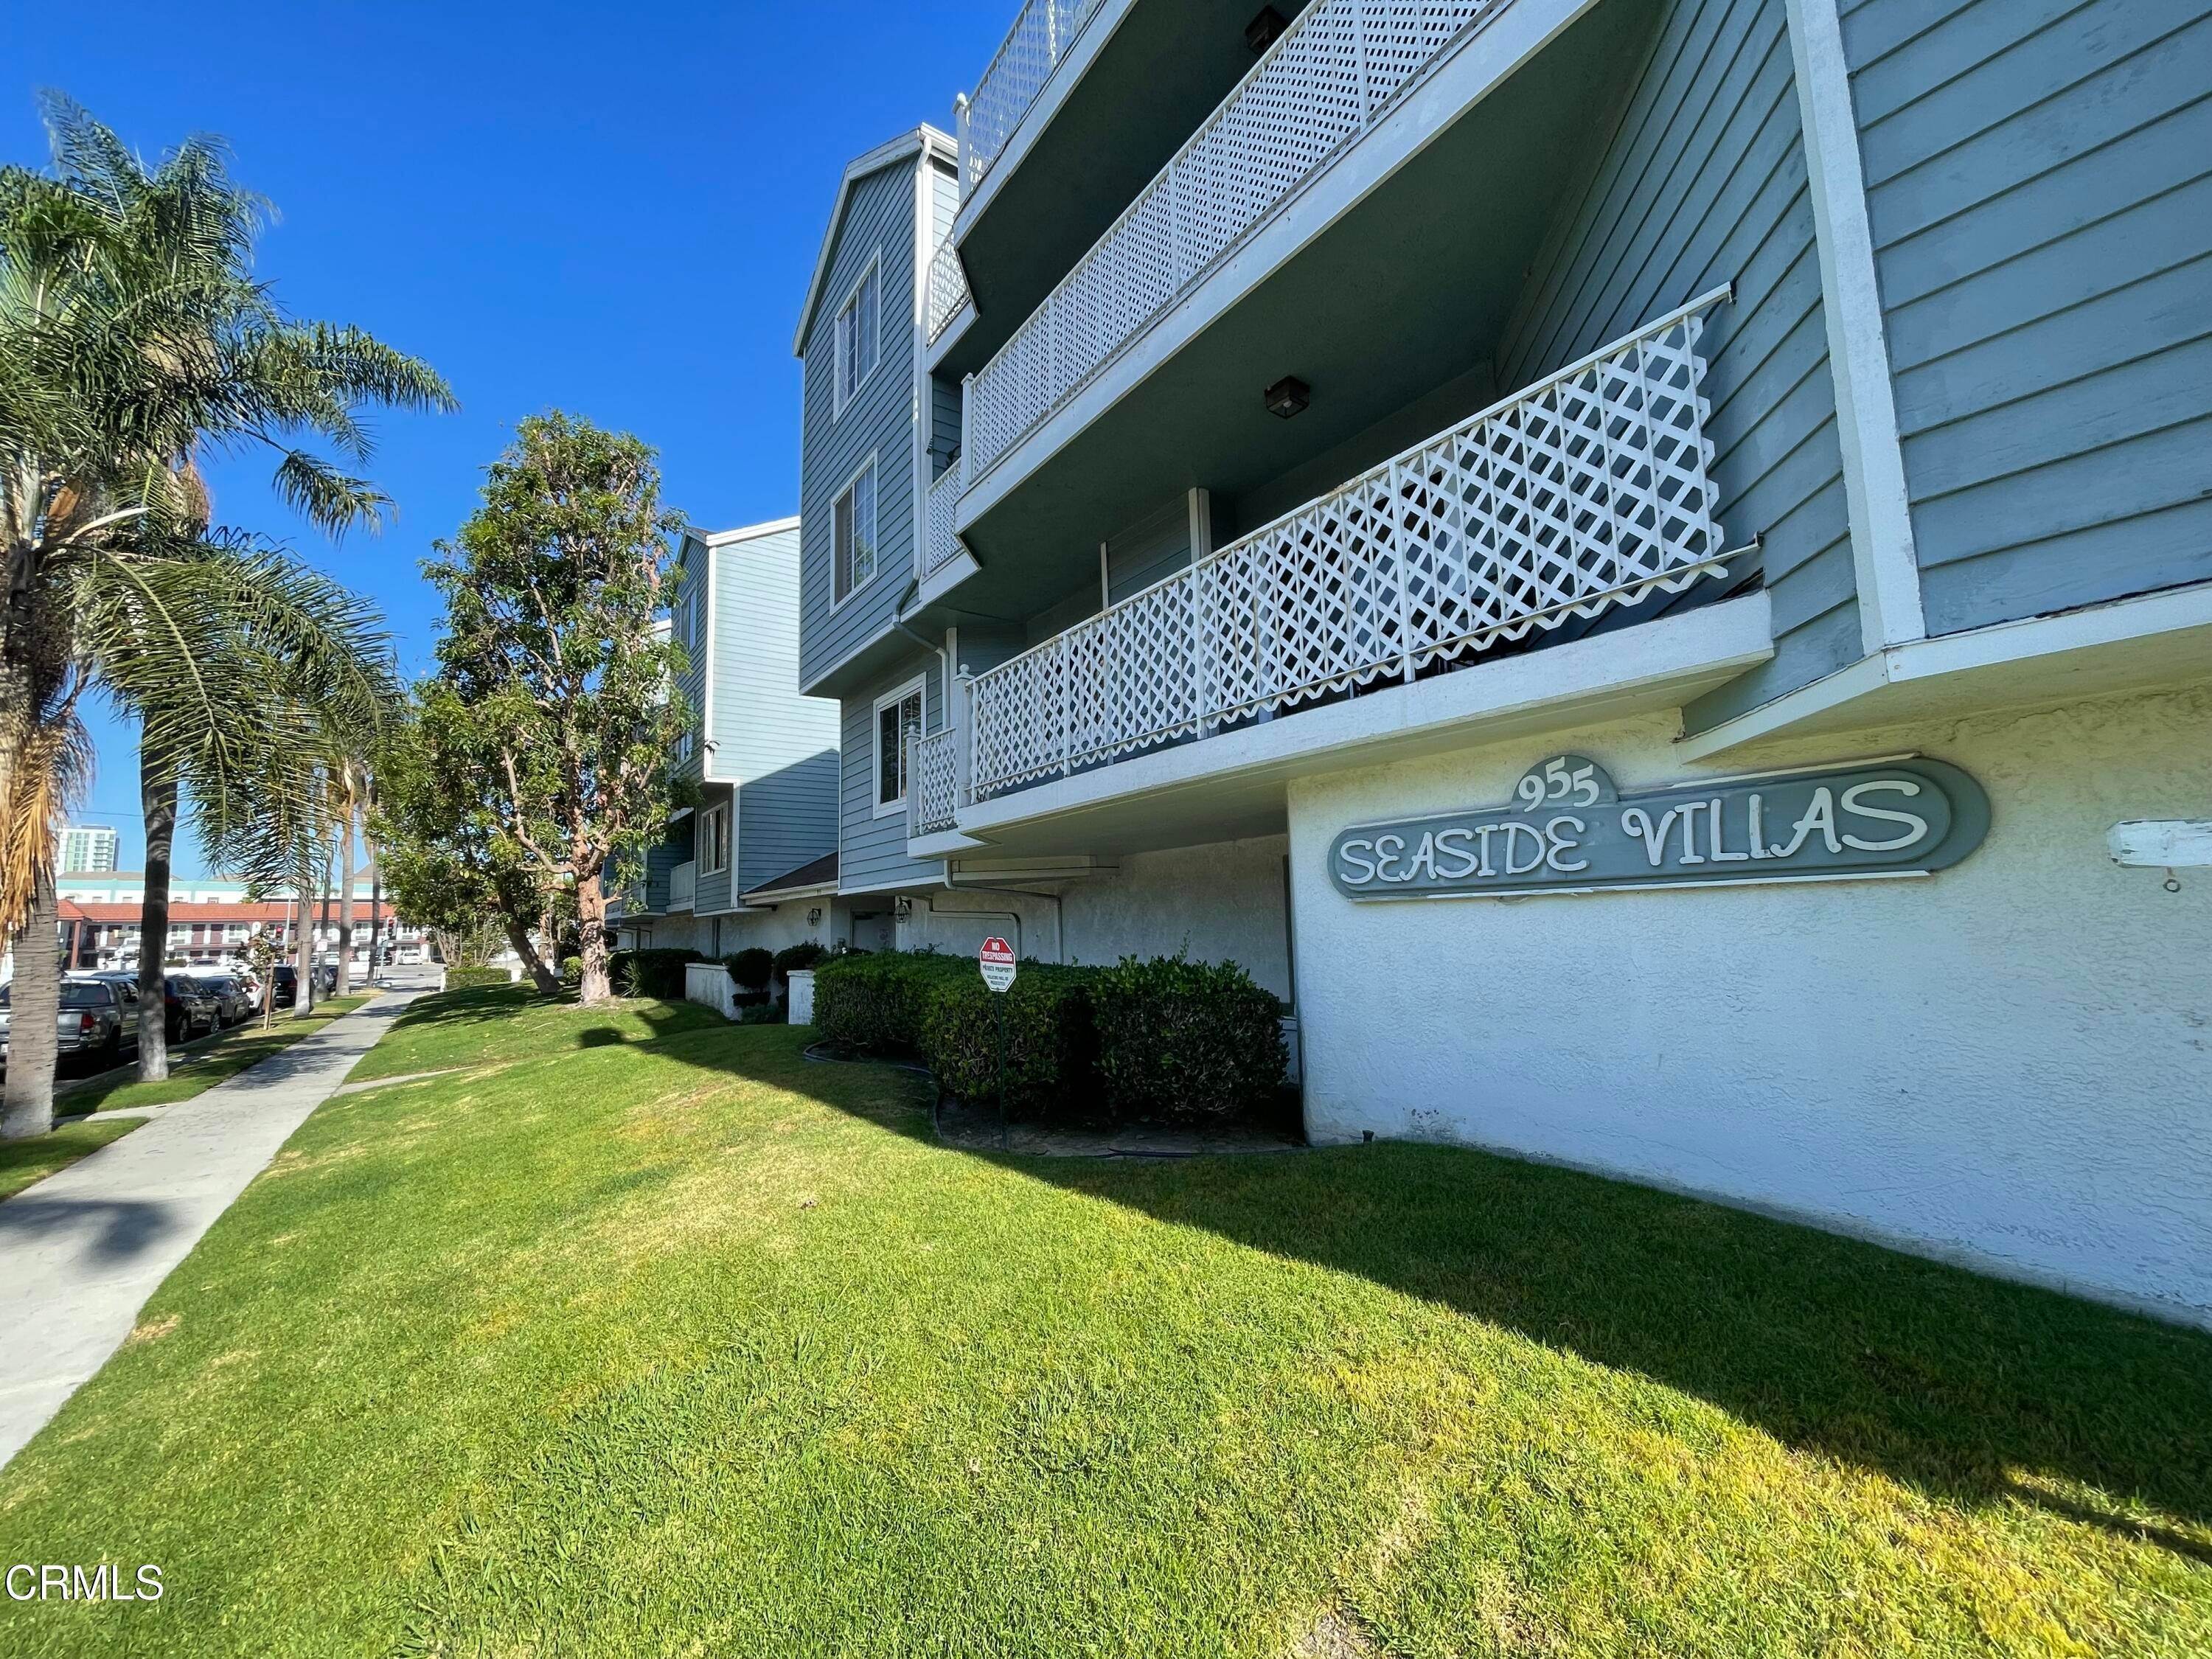 Condominiums for Sale at 955 East 3rd Street 203 #203 955 East 3rd Street 203 Long Beach, California 90802 United States